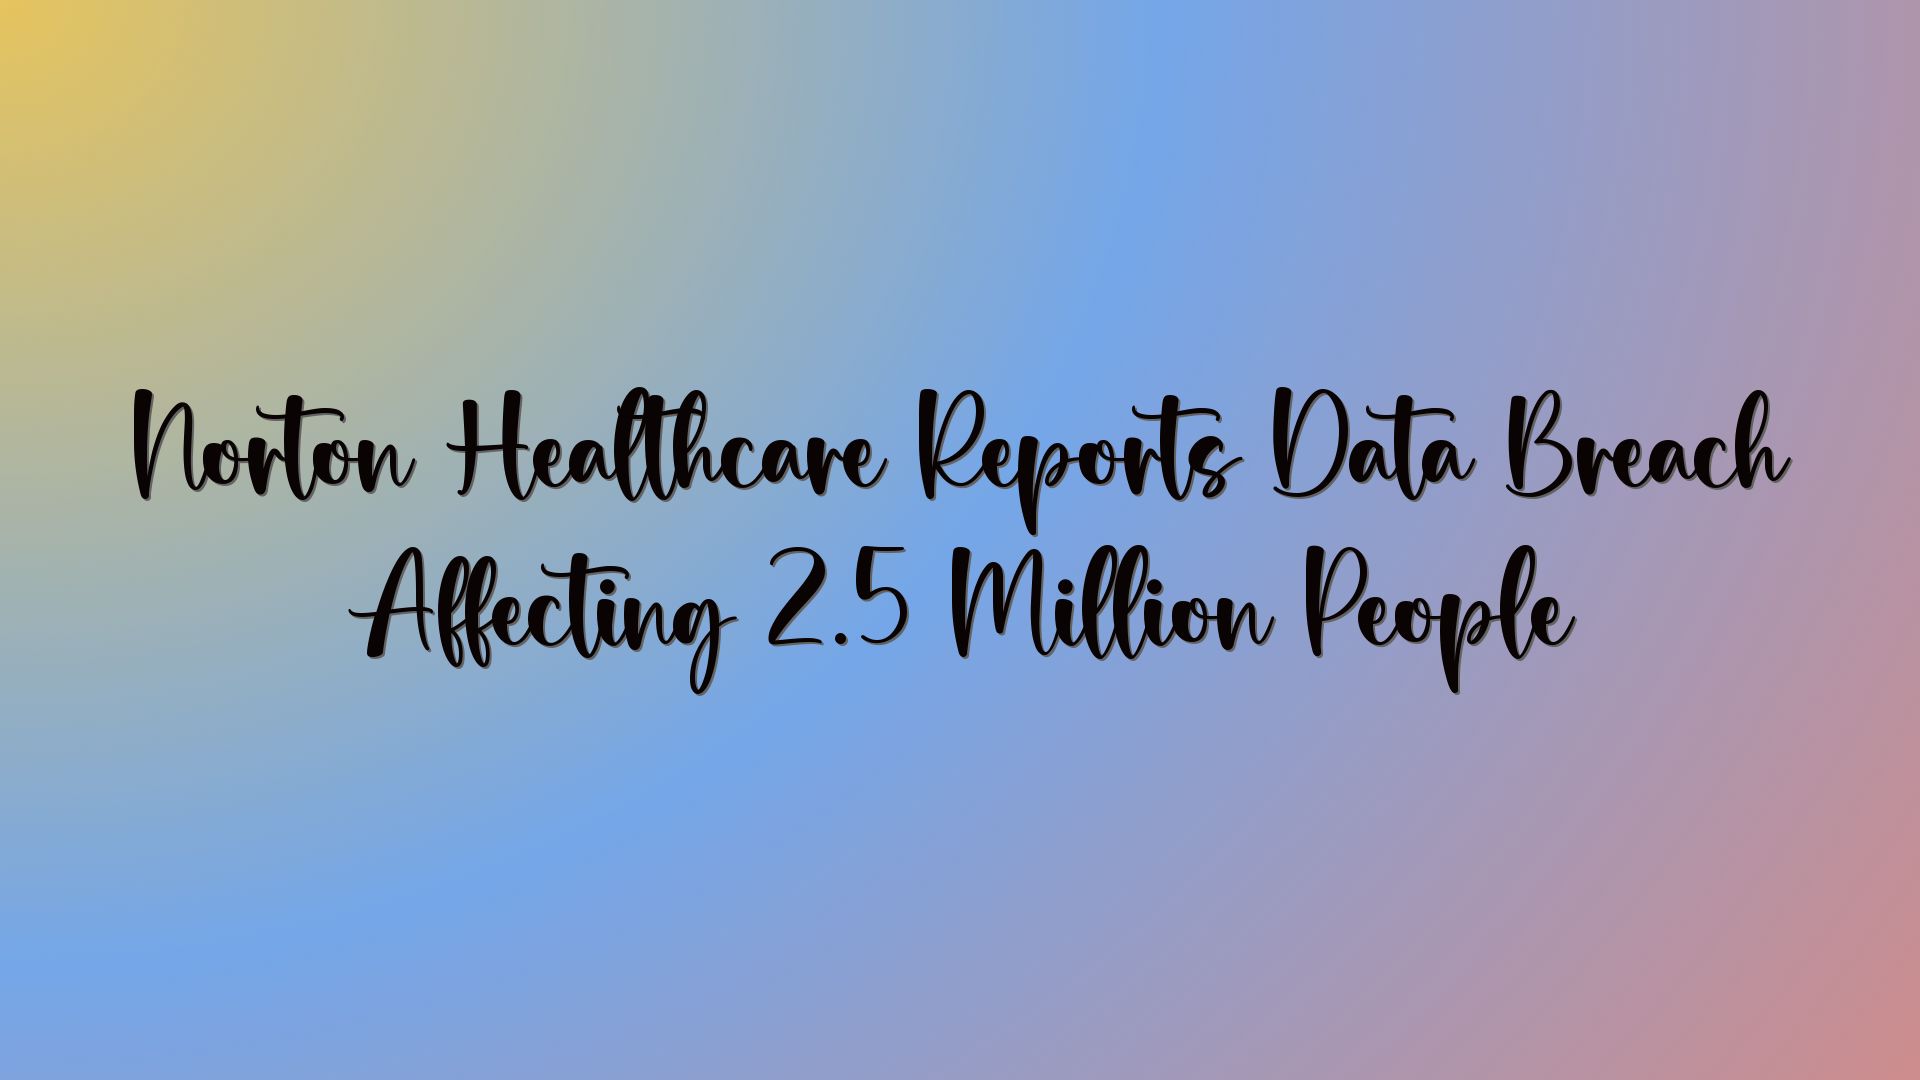 Norton Healthcare Reports Data Breach Affecting 2.5 Million People